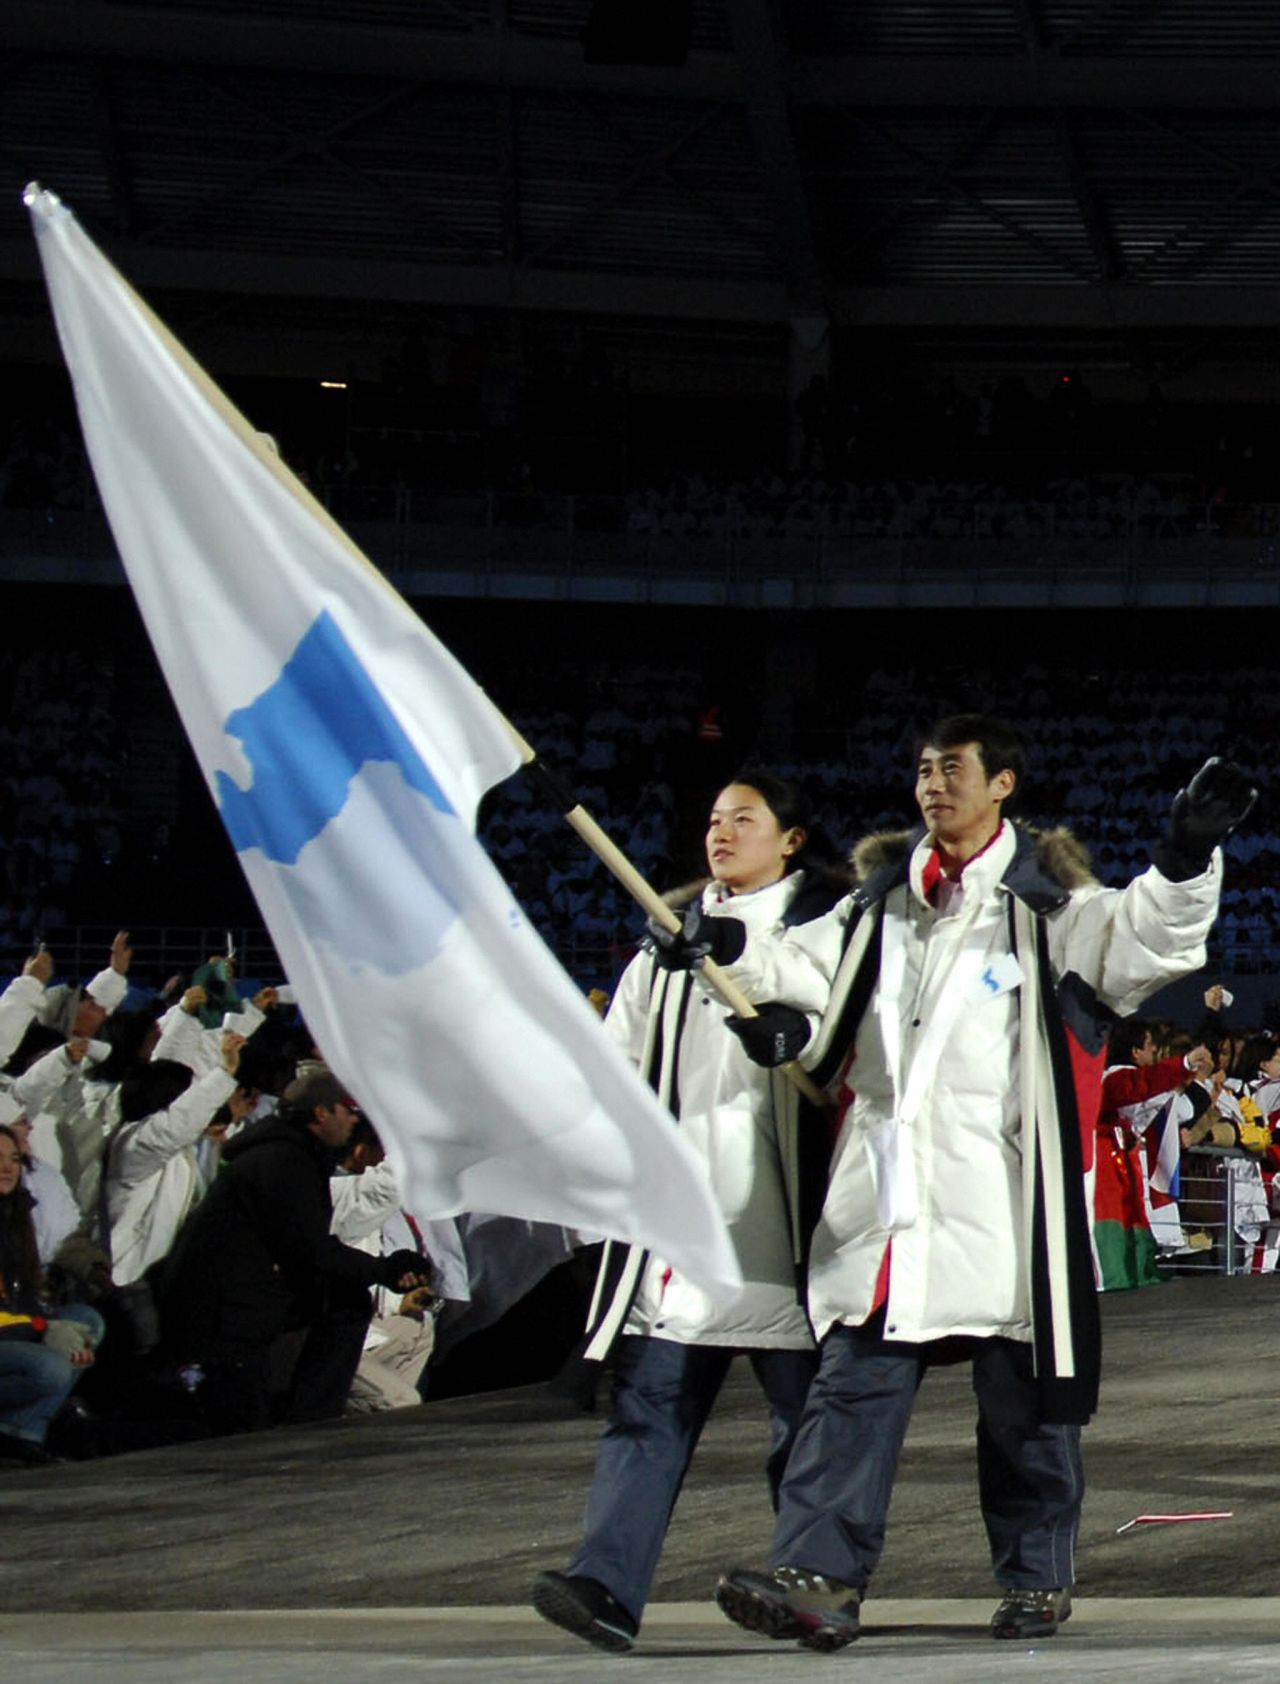 South Korean speed skater  Lee Bora (left) and North Korean figure skater Han Jong-In lead their delegation as they arrive for the opening ceremony of the 2006 Winter Olympics at the Olympic stadium in Turin, Italy.